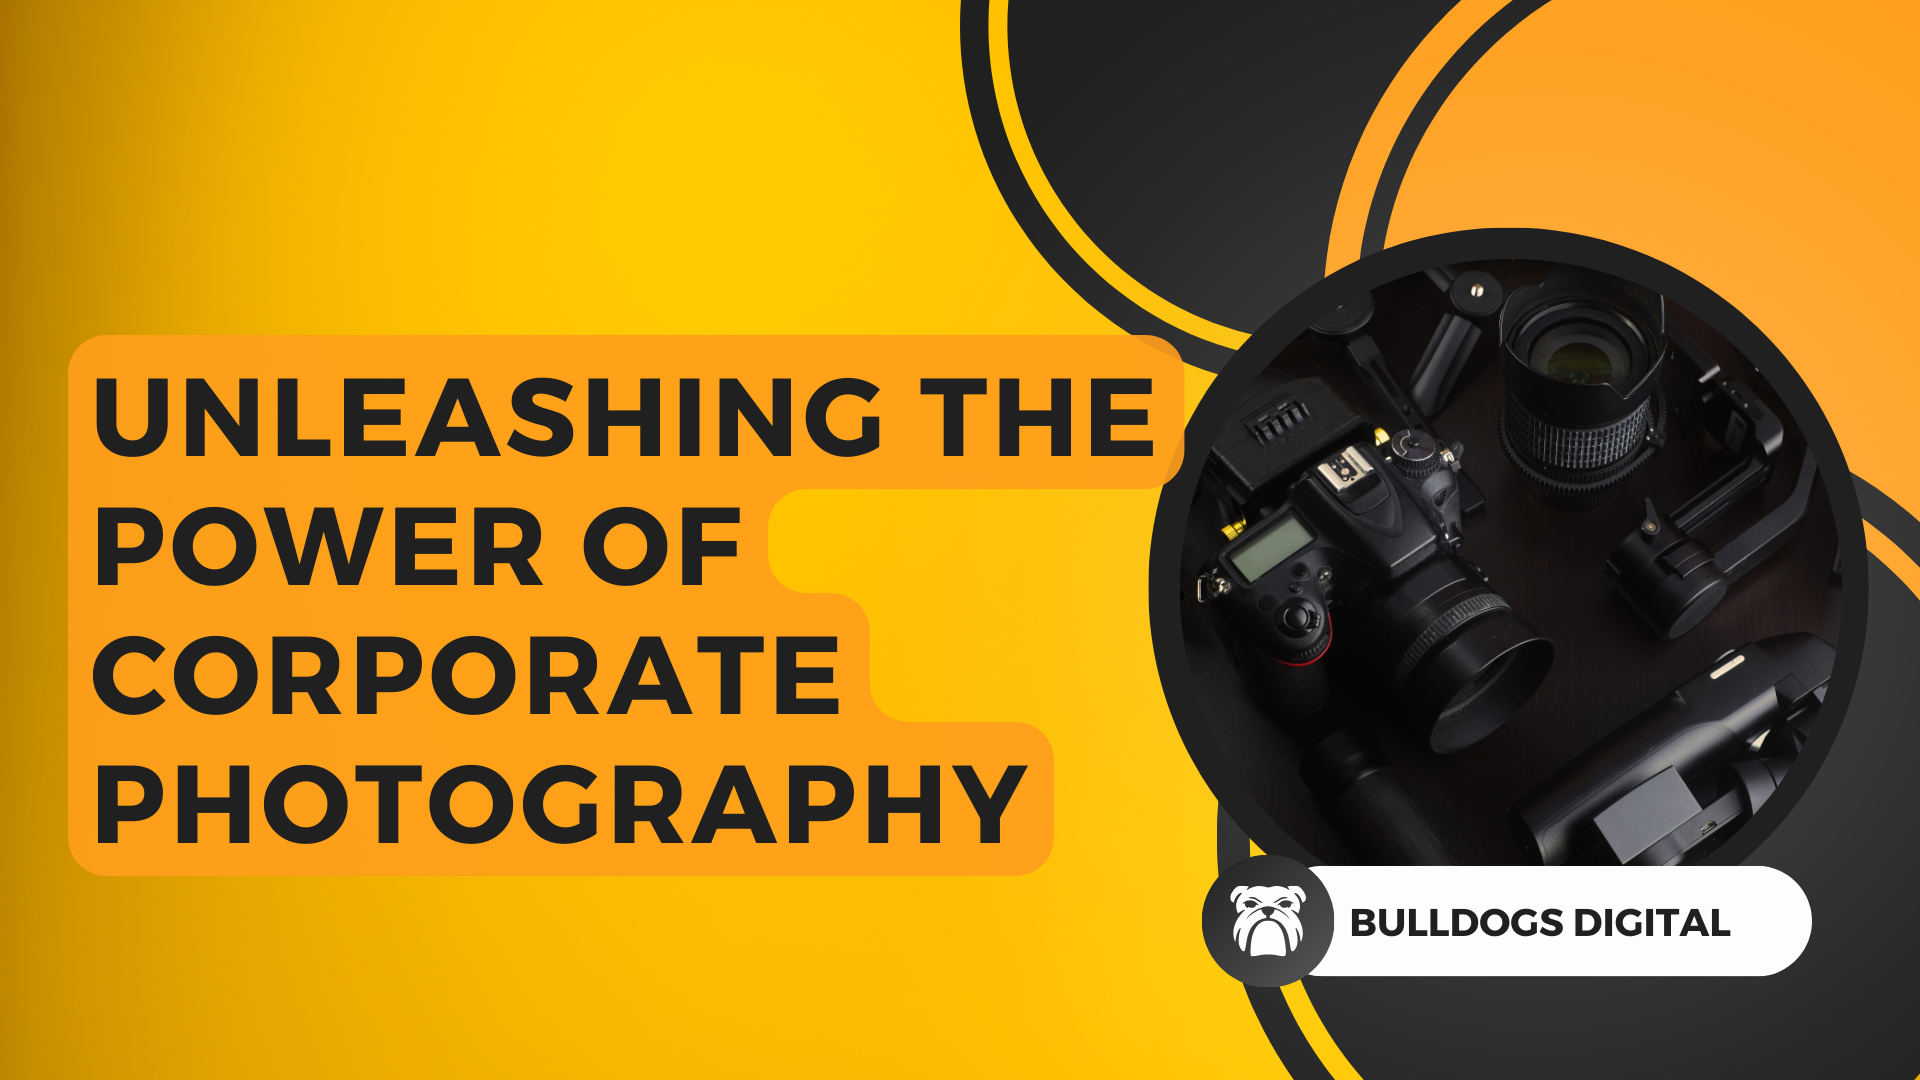 The image incorporates a harmonious color palette and carefully arranged elements. It captures the essence of corporate photography, showcasing a blend of technical expertise, attention to detail, and artistic sensibilities. Bulldogs Digital Website Design and Photography Sussex